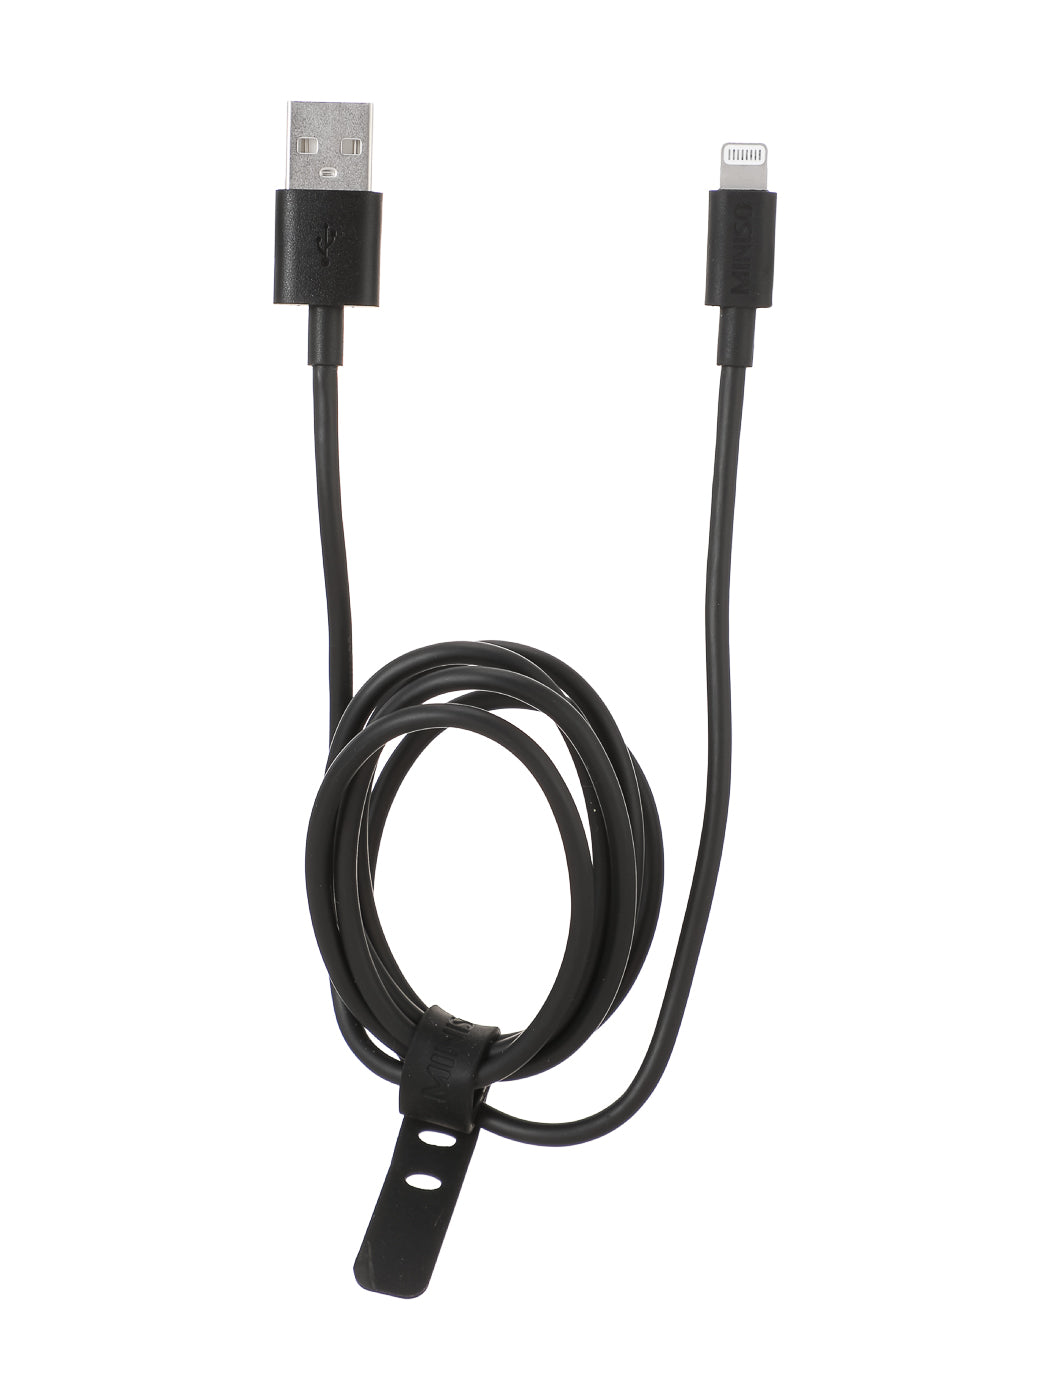 MINISO 1M FAST CHARGE CHARGE & SYNC CABLE WITH LIGHTNING CONNECTOR (BLACK) 2010251513103 CHARGING CABLE WITH LIGHTNING CONNECTOR